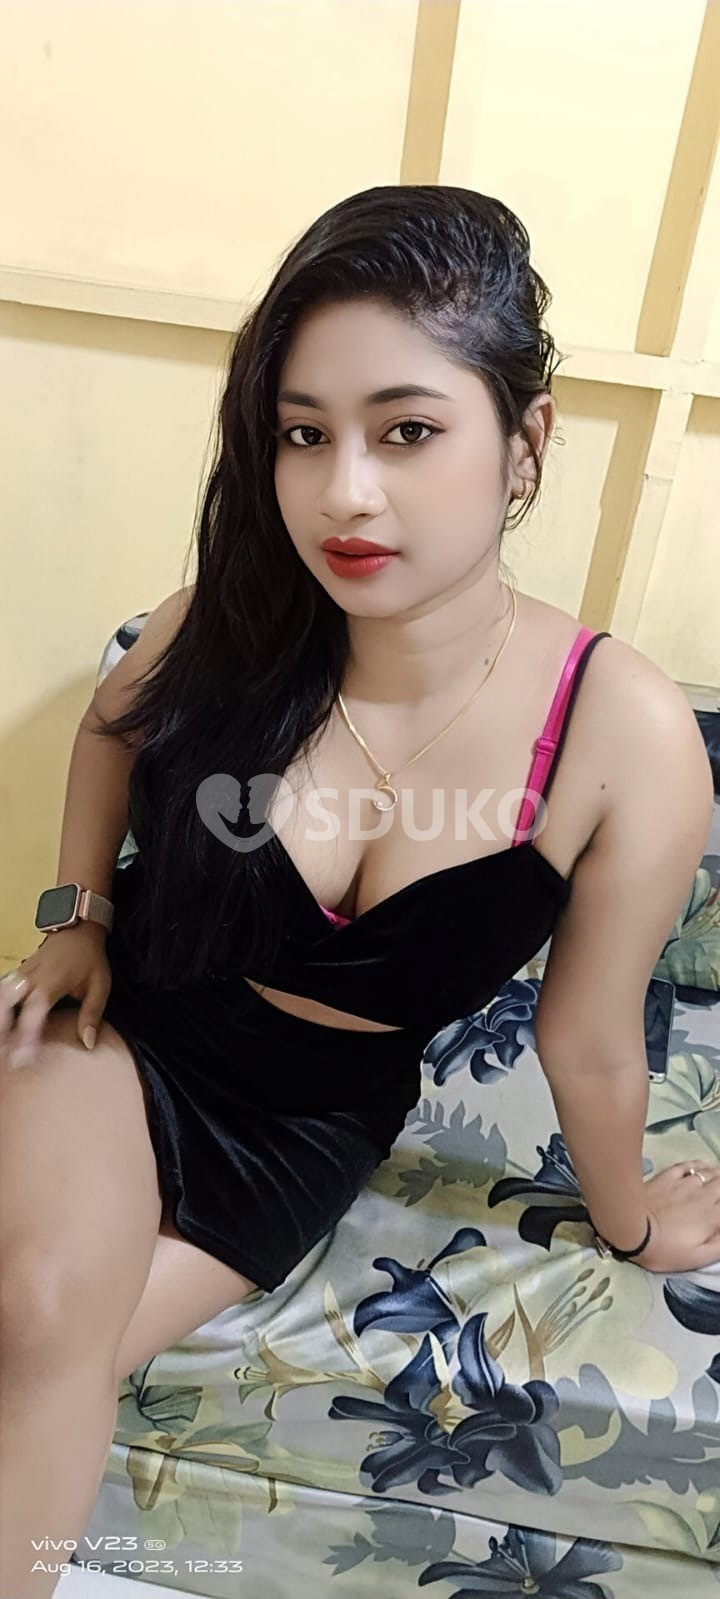 Bahadurgarh ❣️Best call gir l /service in low price high profile call girl available call me anytime